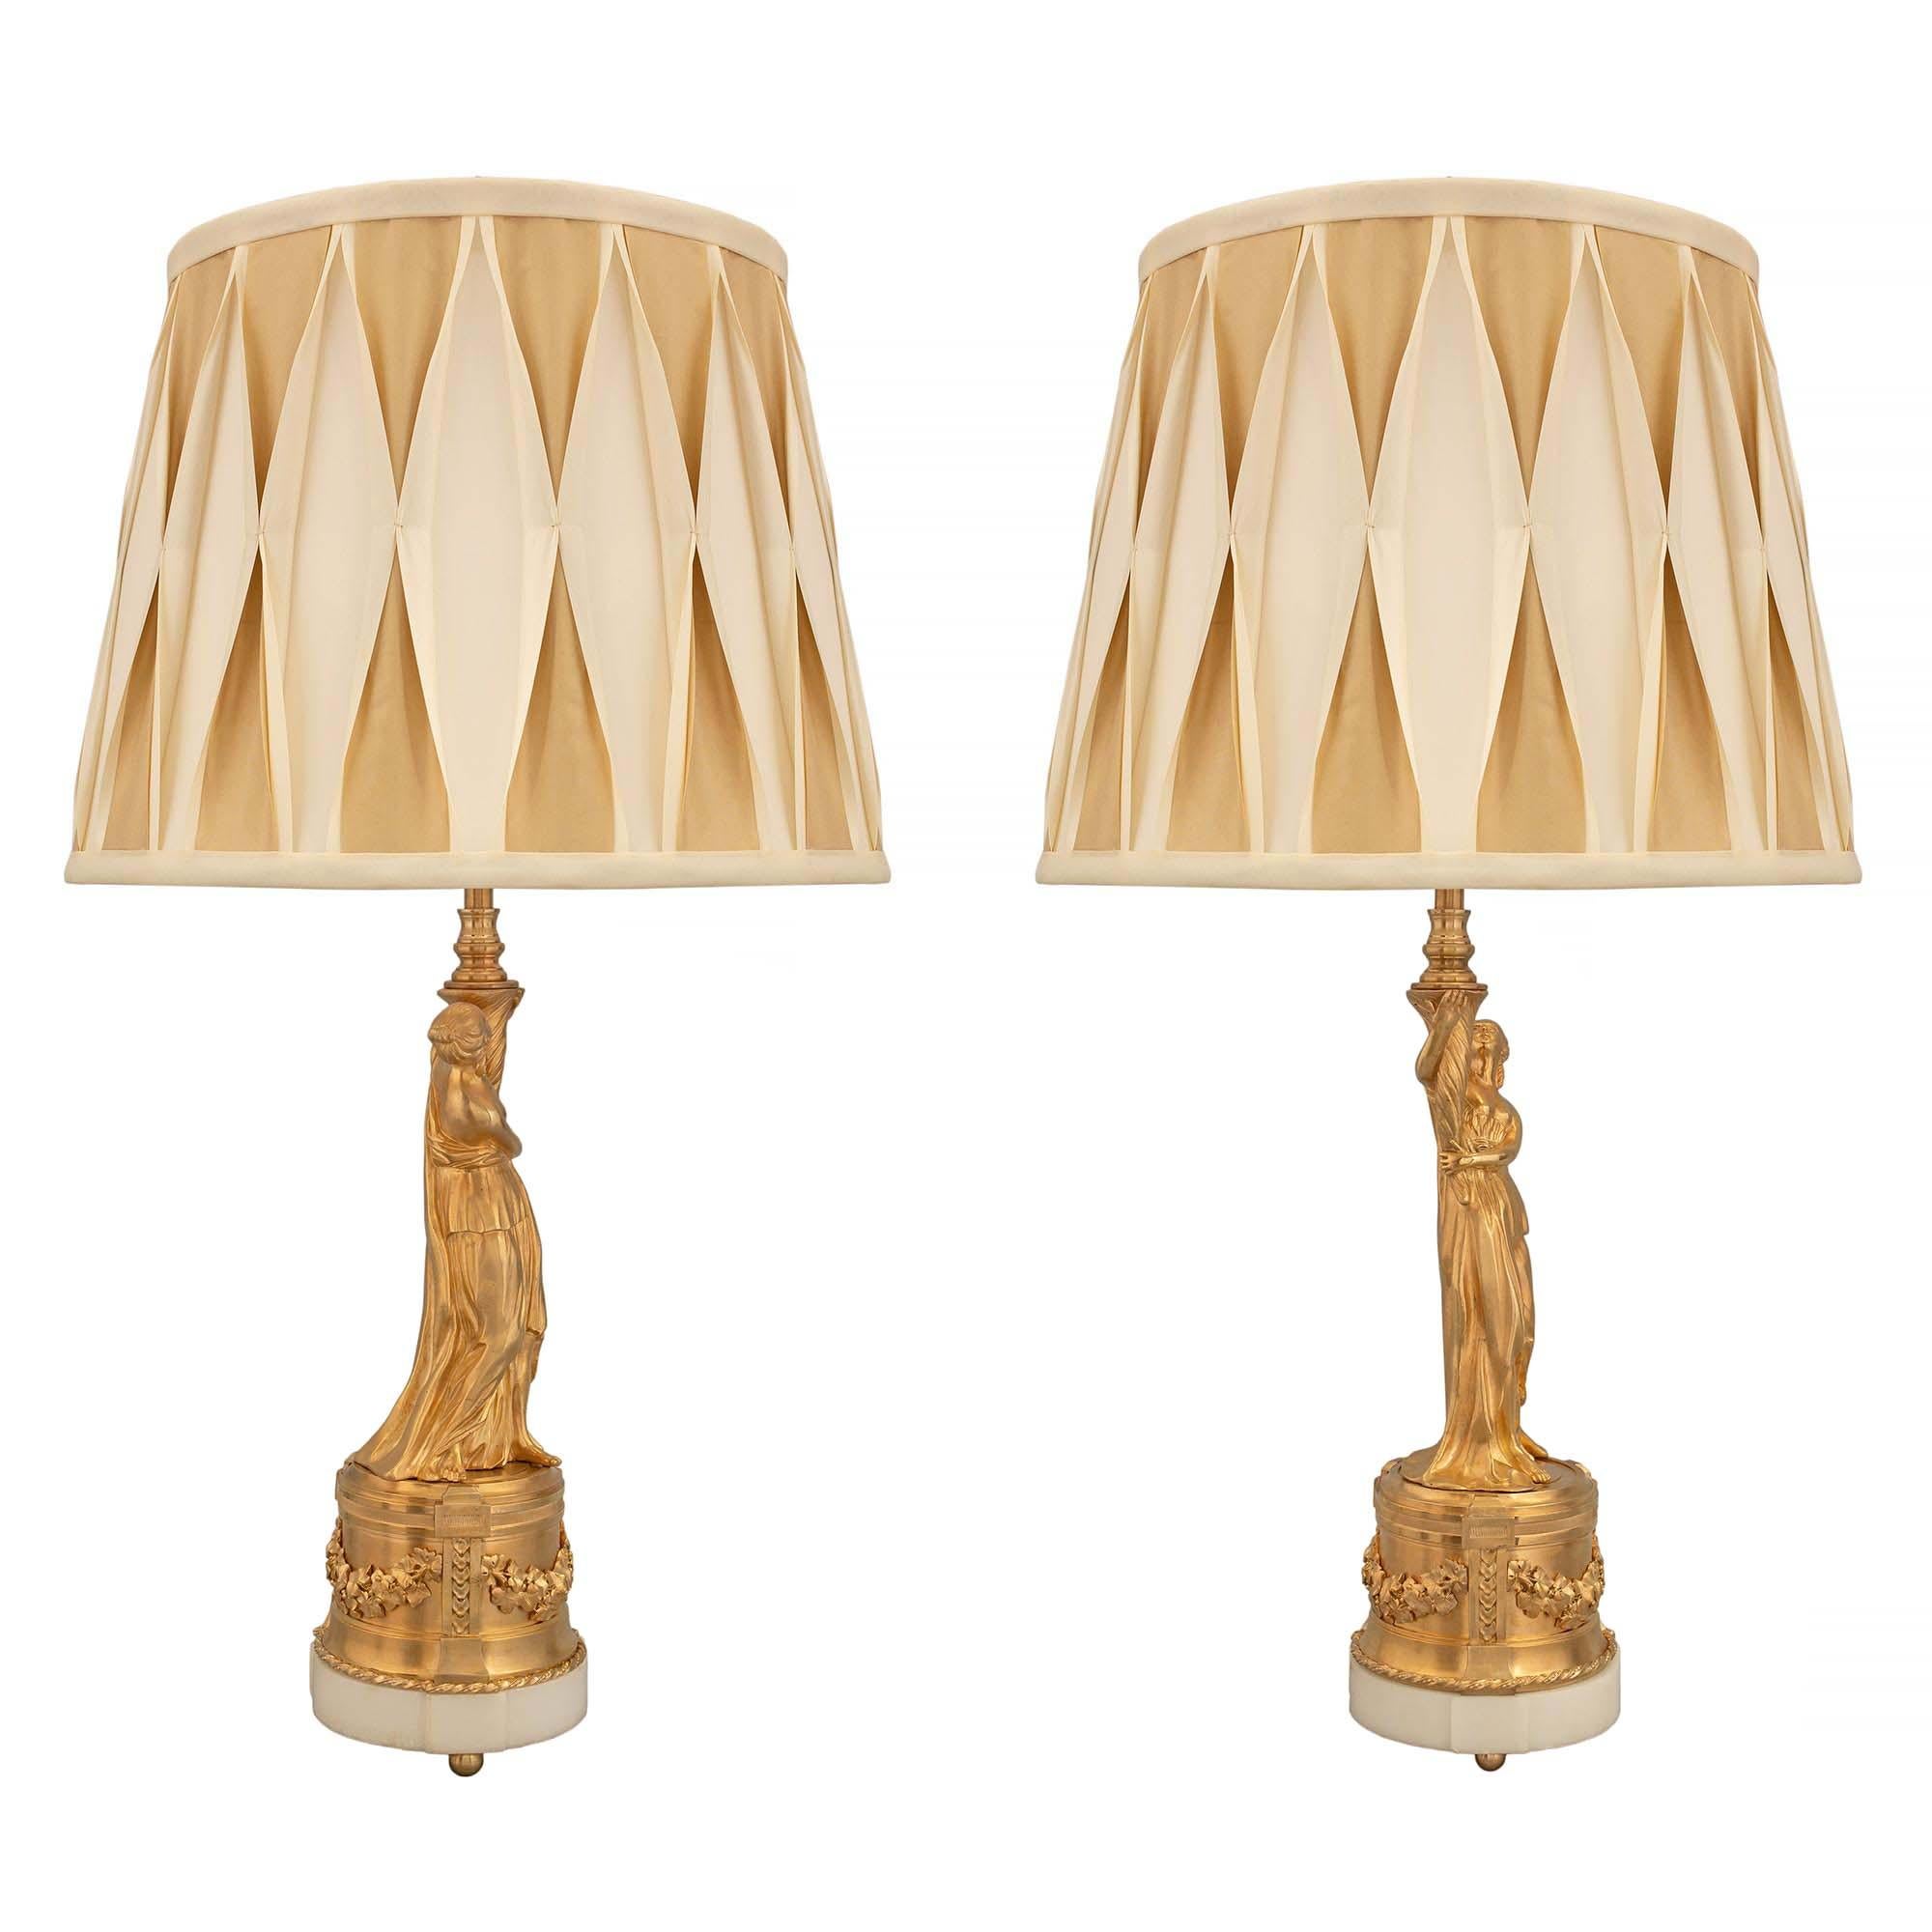 A very elegant pair of French 19th century Louis XVI st. ormolu and white Carrara marble statues mounted into lamps. Each lamp is raised by bun ormolu supports below a circular white Carrara marble base. Above the base is a circular ormolu column